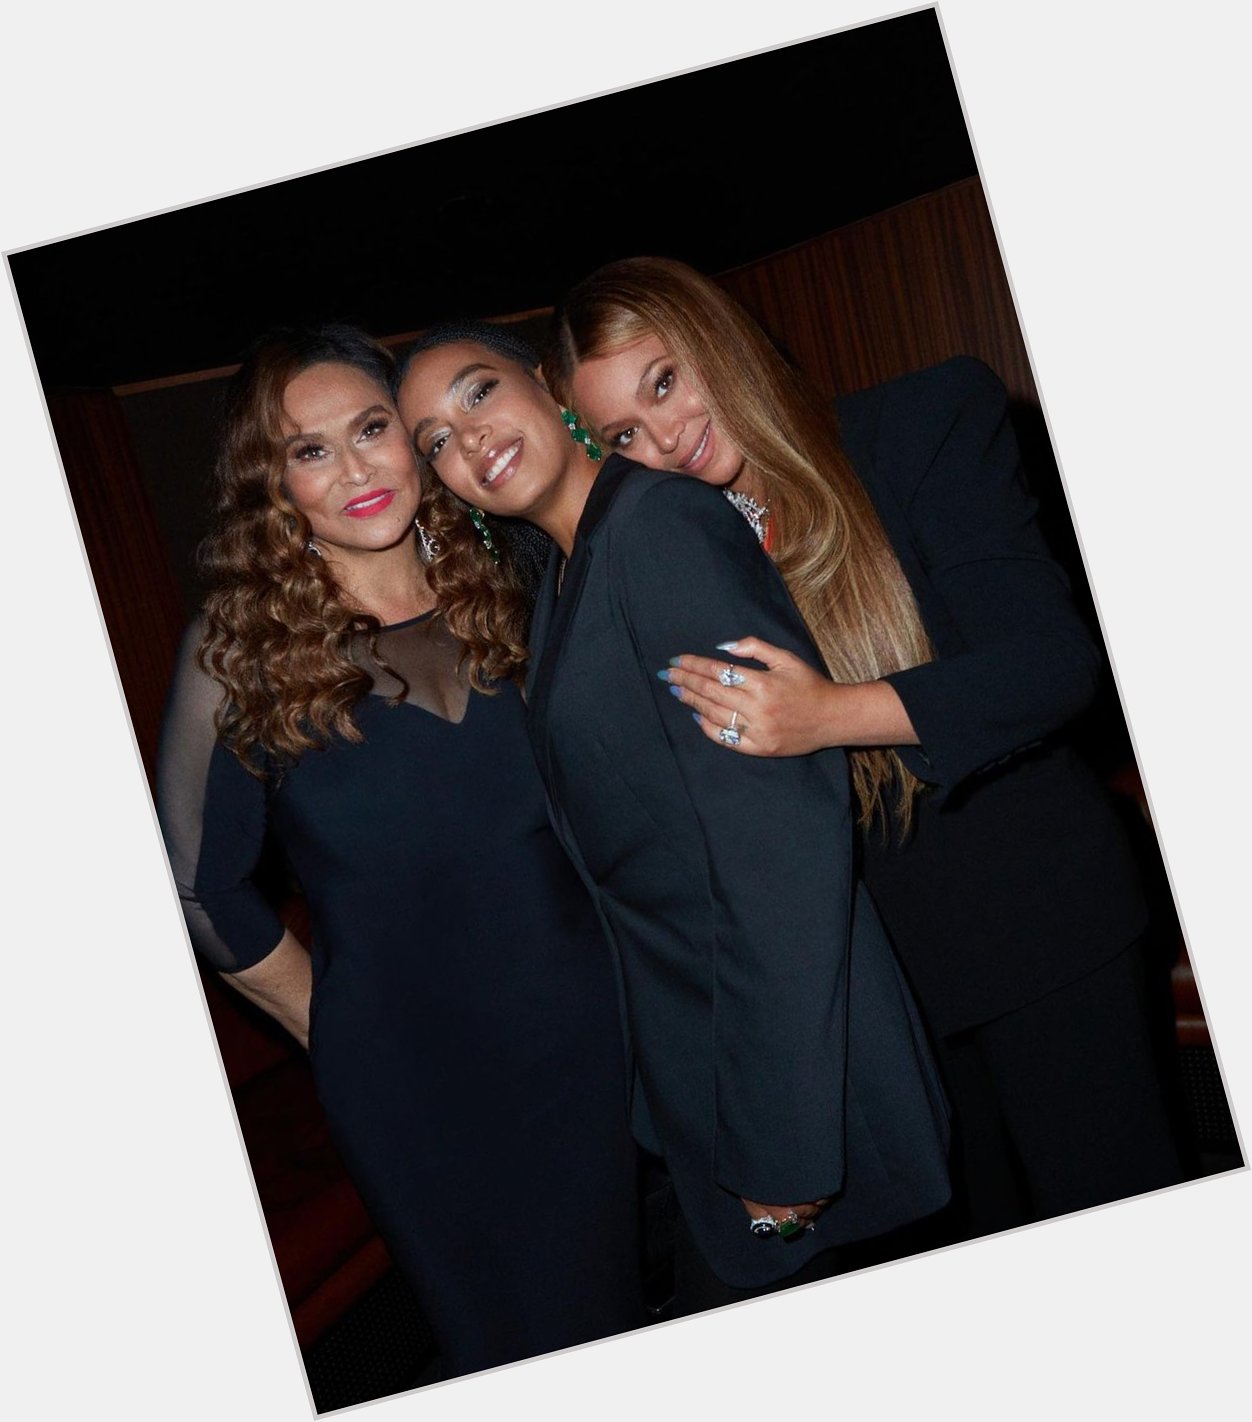 Happy birthday to Ms. Tina Knowles, literal creator of the most talented and Webby-honored siblings!  